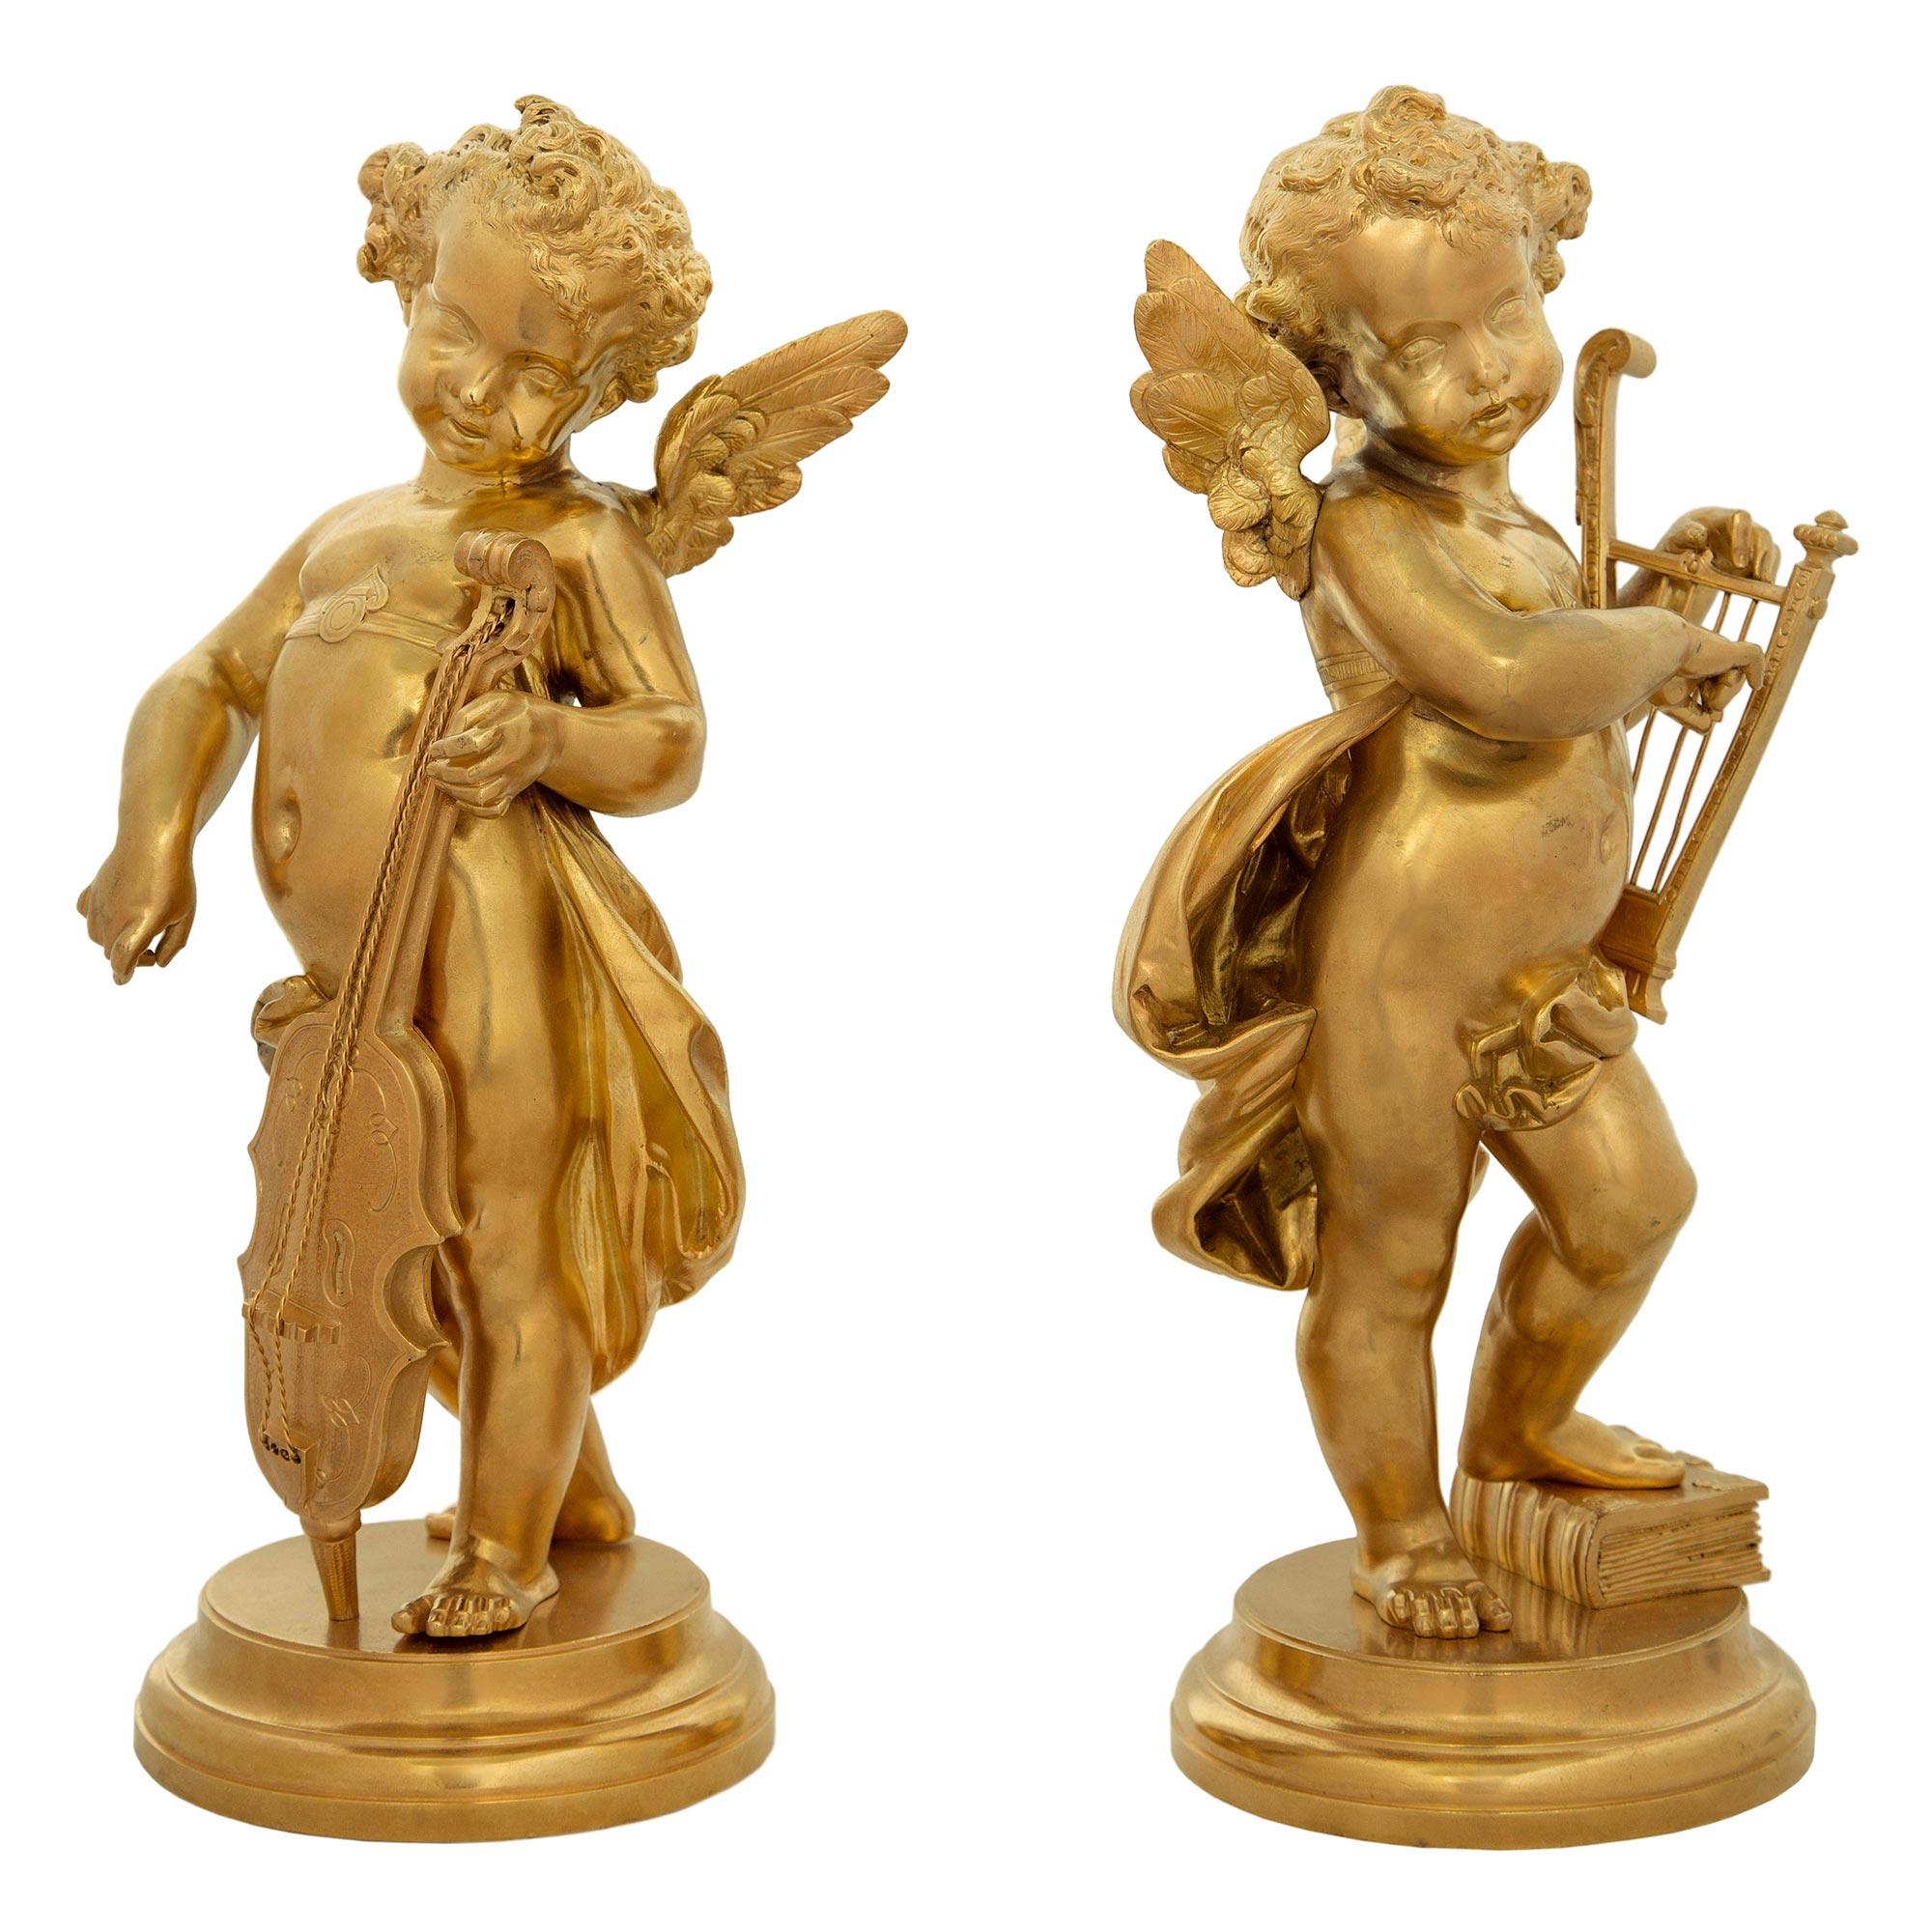 A very charming true pair of French 19th century Louis XVI style ormolu cherub statues. Each richly chased winged cherub displays a joyful expression and stands upon a tapered circular base. One stands upon an ormolu book while playing a delicate